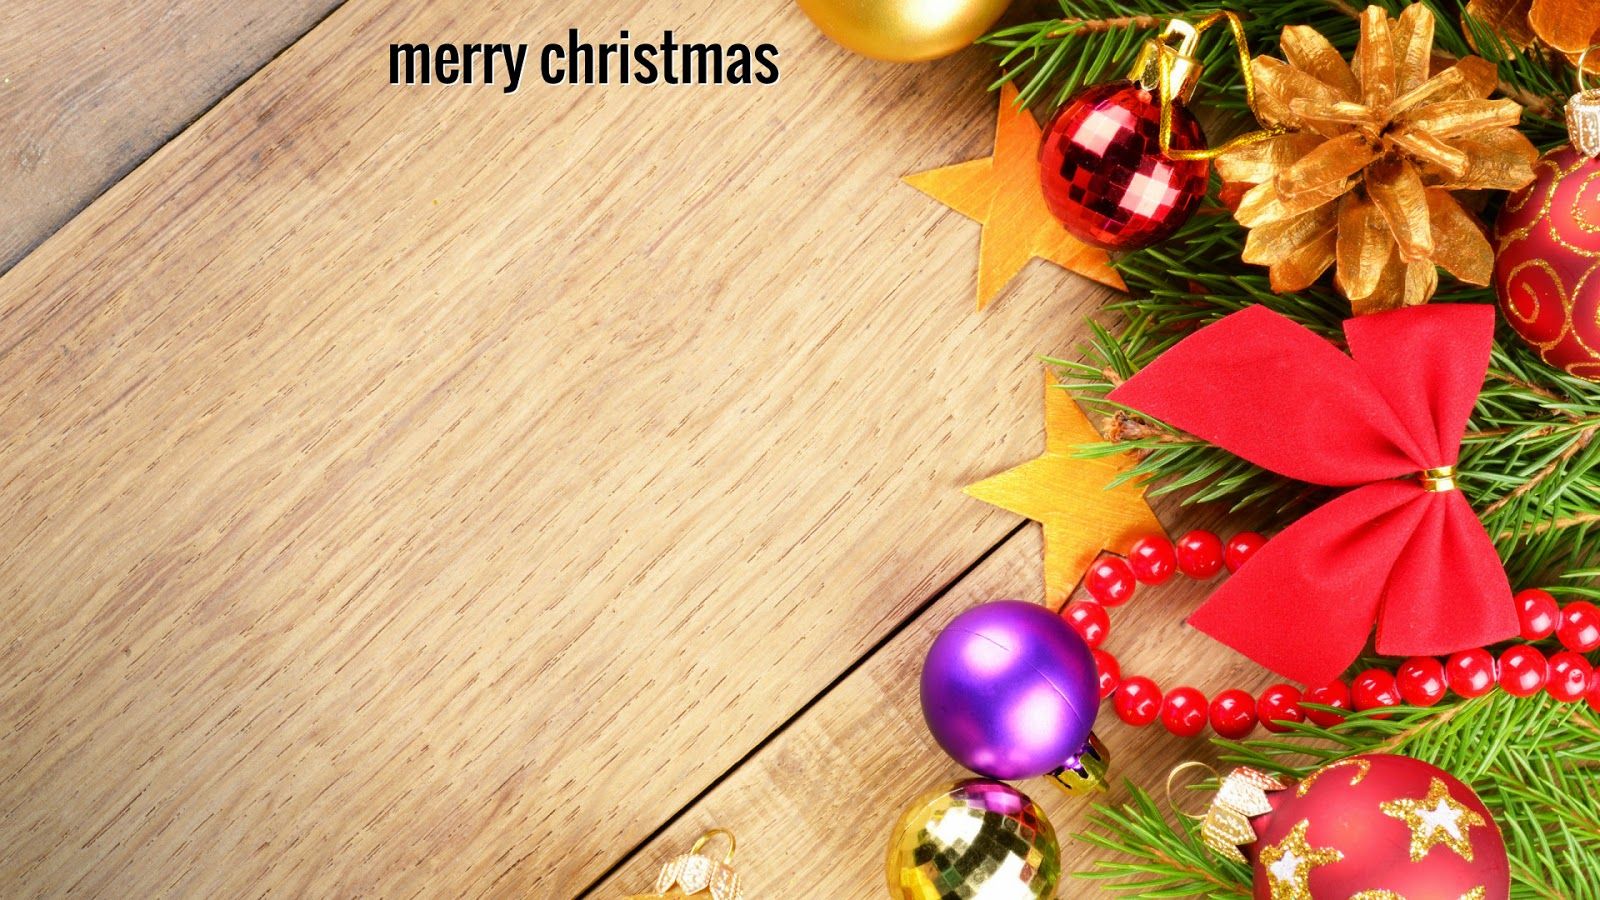 20 Best Christmas Wallpapers FULL HD